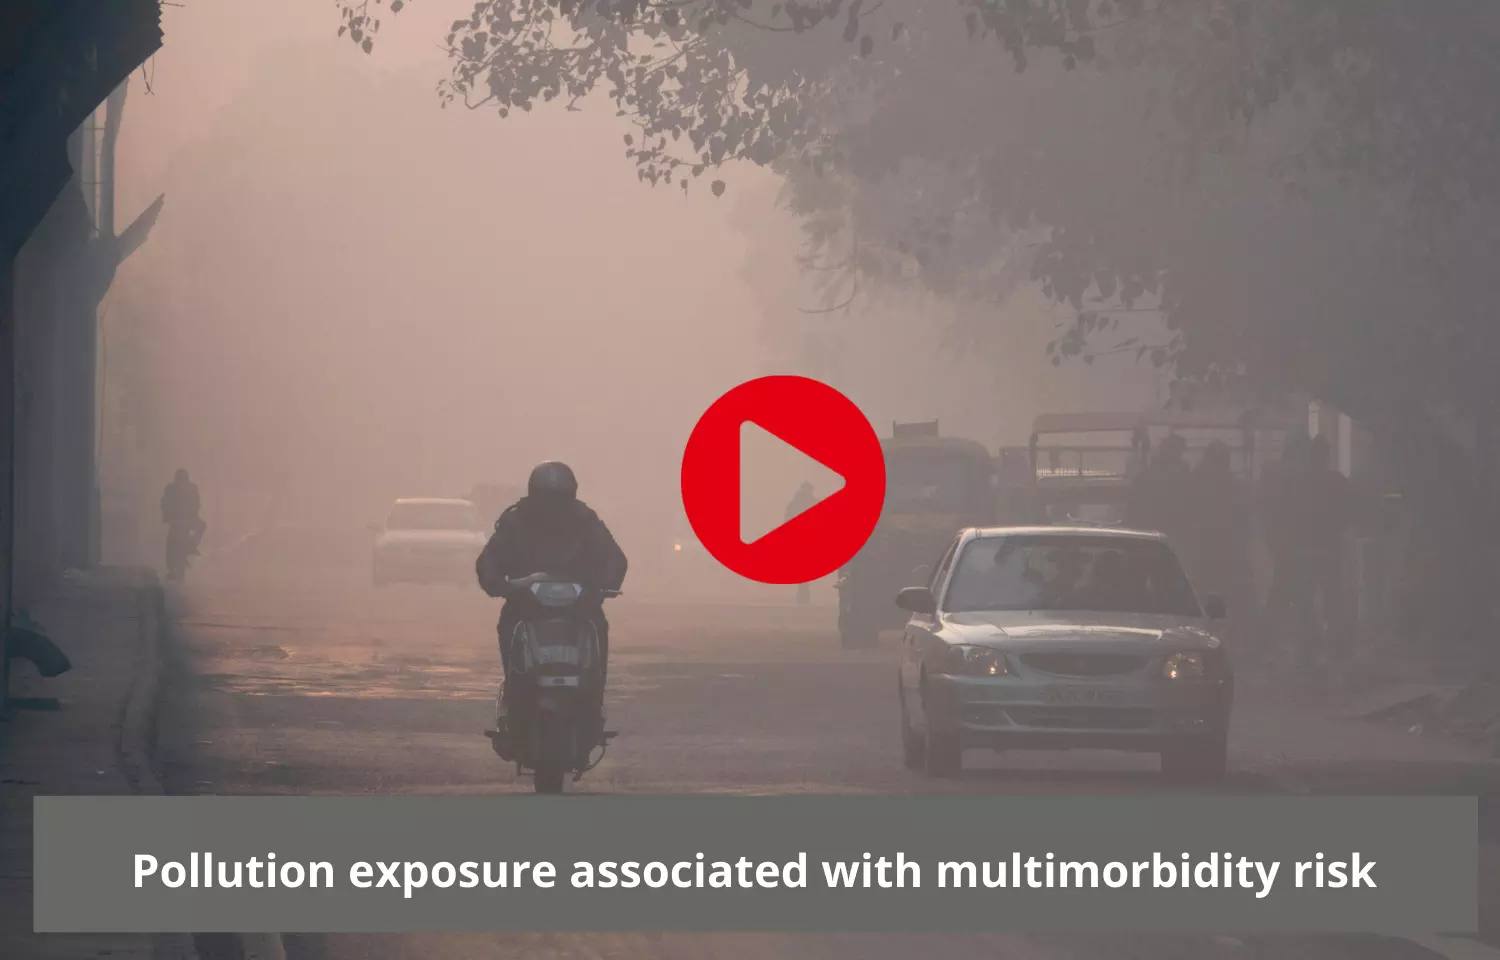 Pollution exposure can cause multimorbidity risk